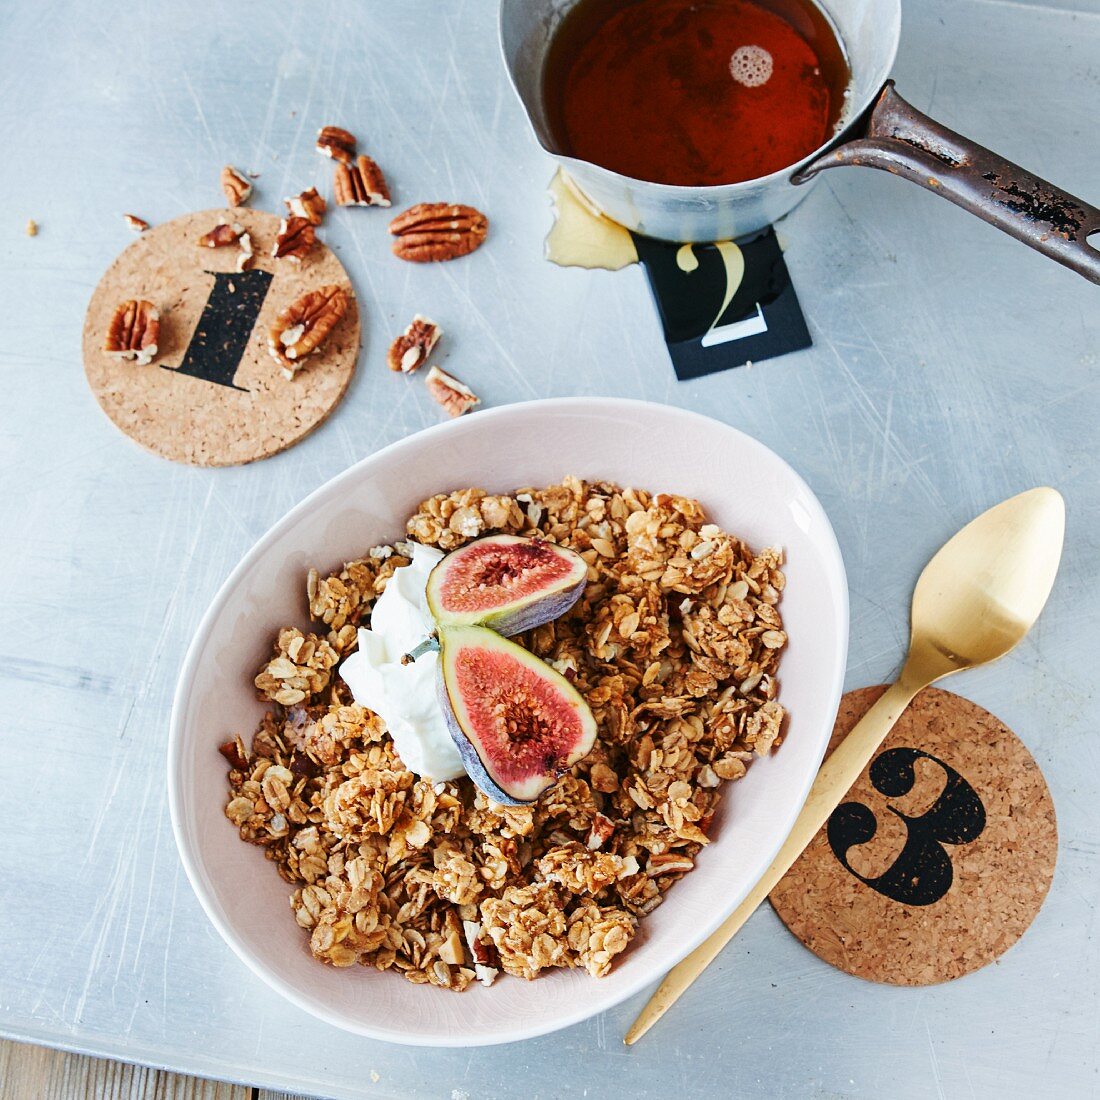 Maple syrup and pecan muesli with figs and yogurt